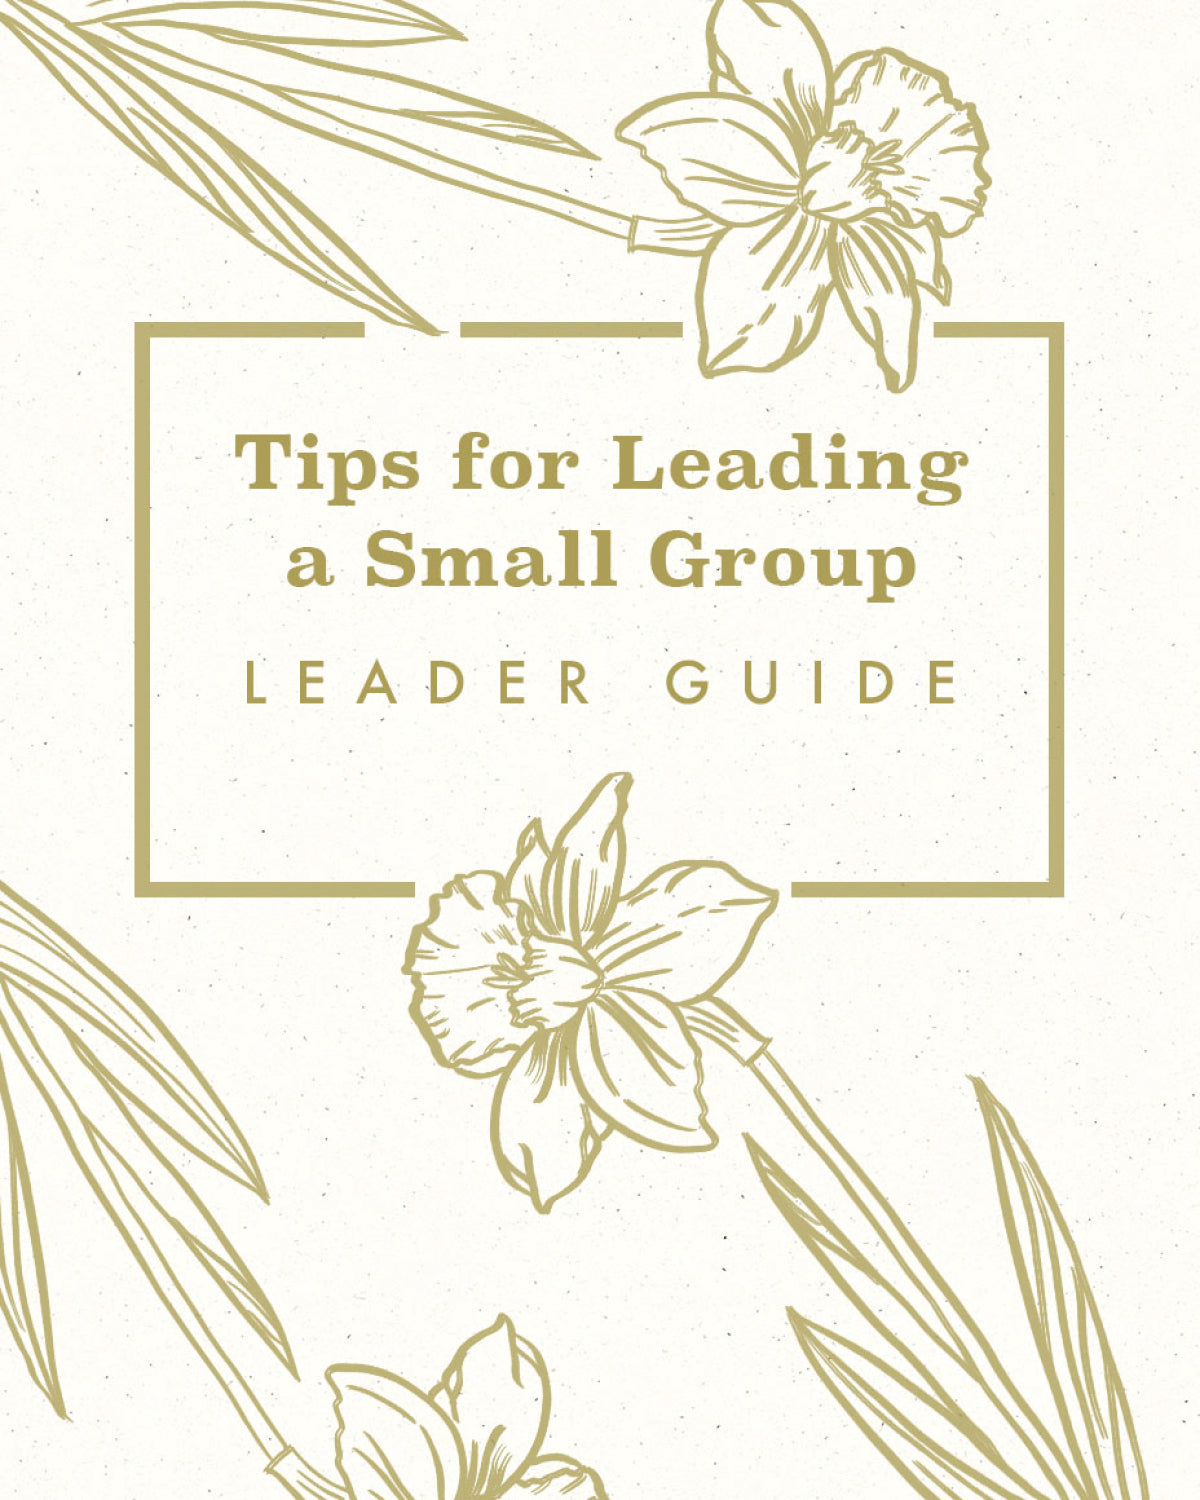 Tips for Leading a Small Group Bible Study [FREE PDF]